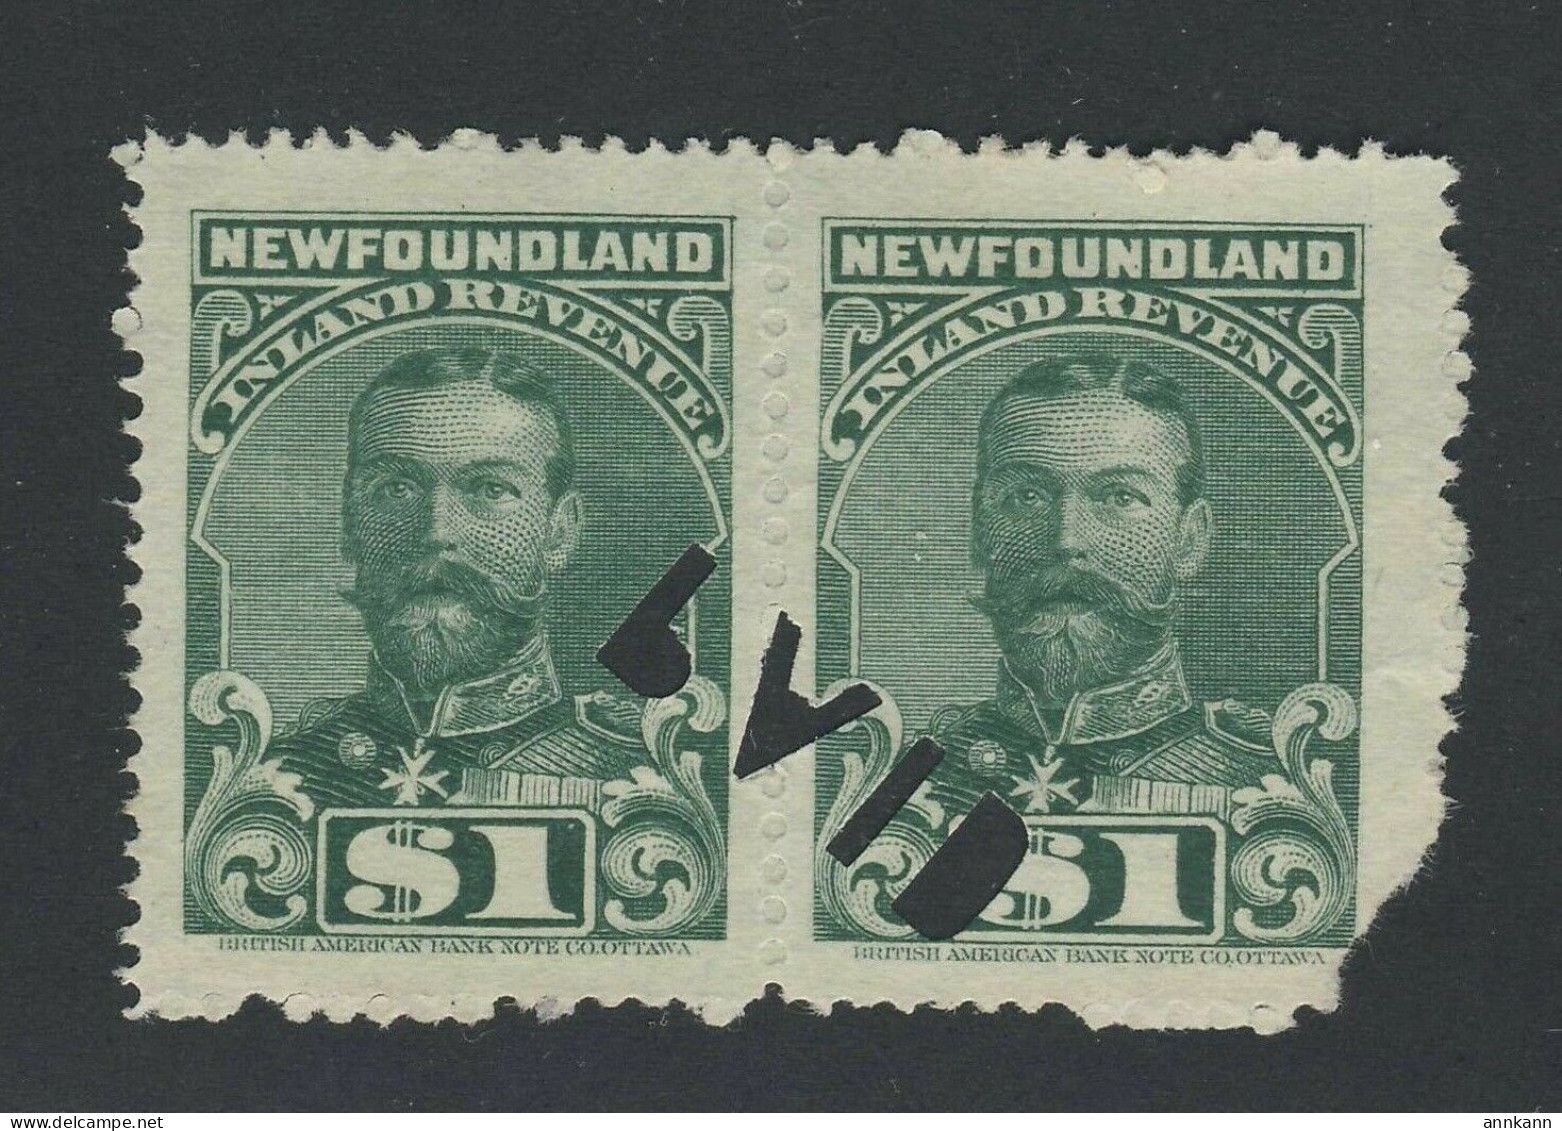 2x Newfoundland Used Inland Revenue Stamps 1910 George V Pair NFR 20-$1.00 - Revenues